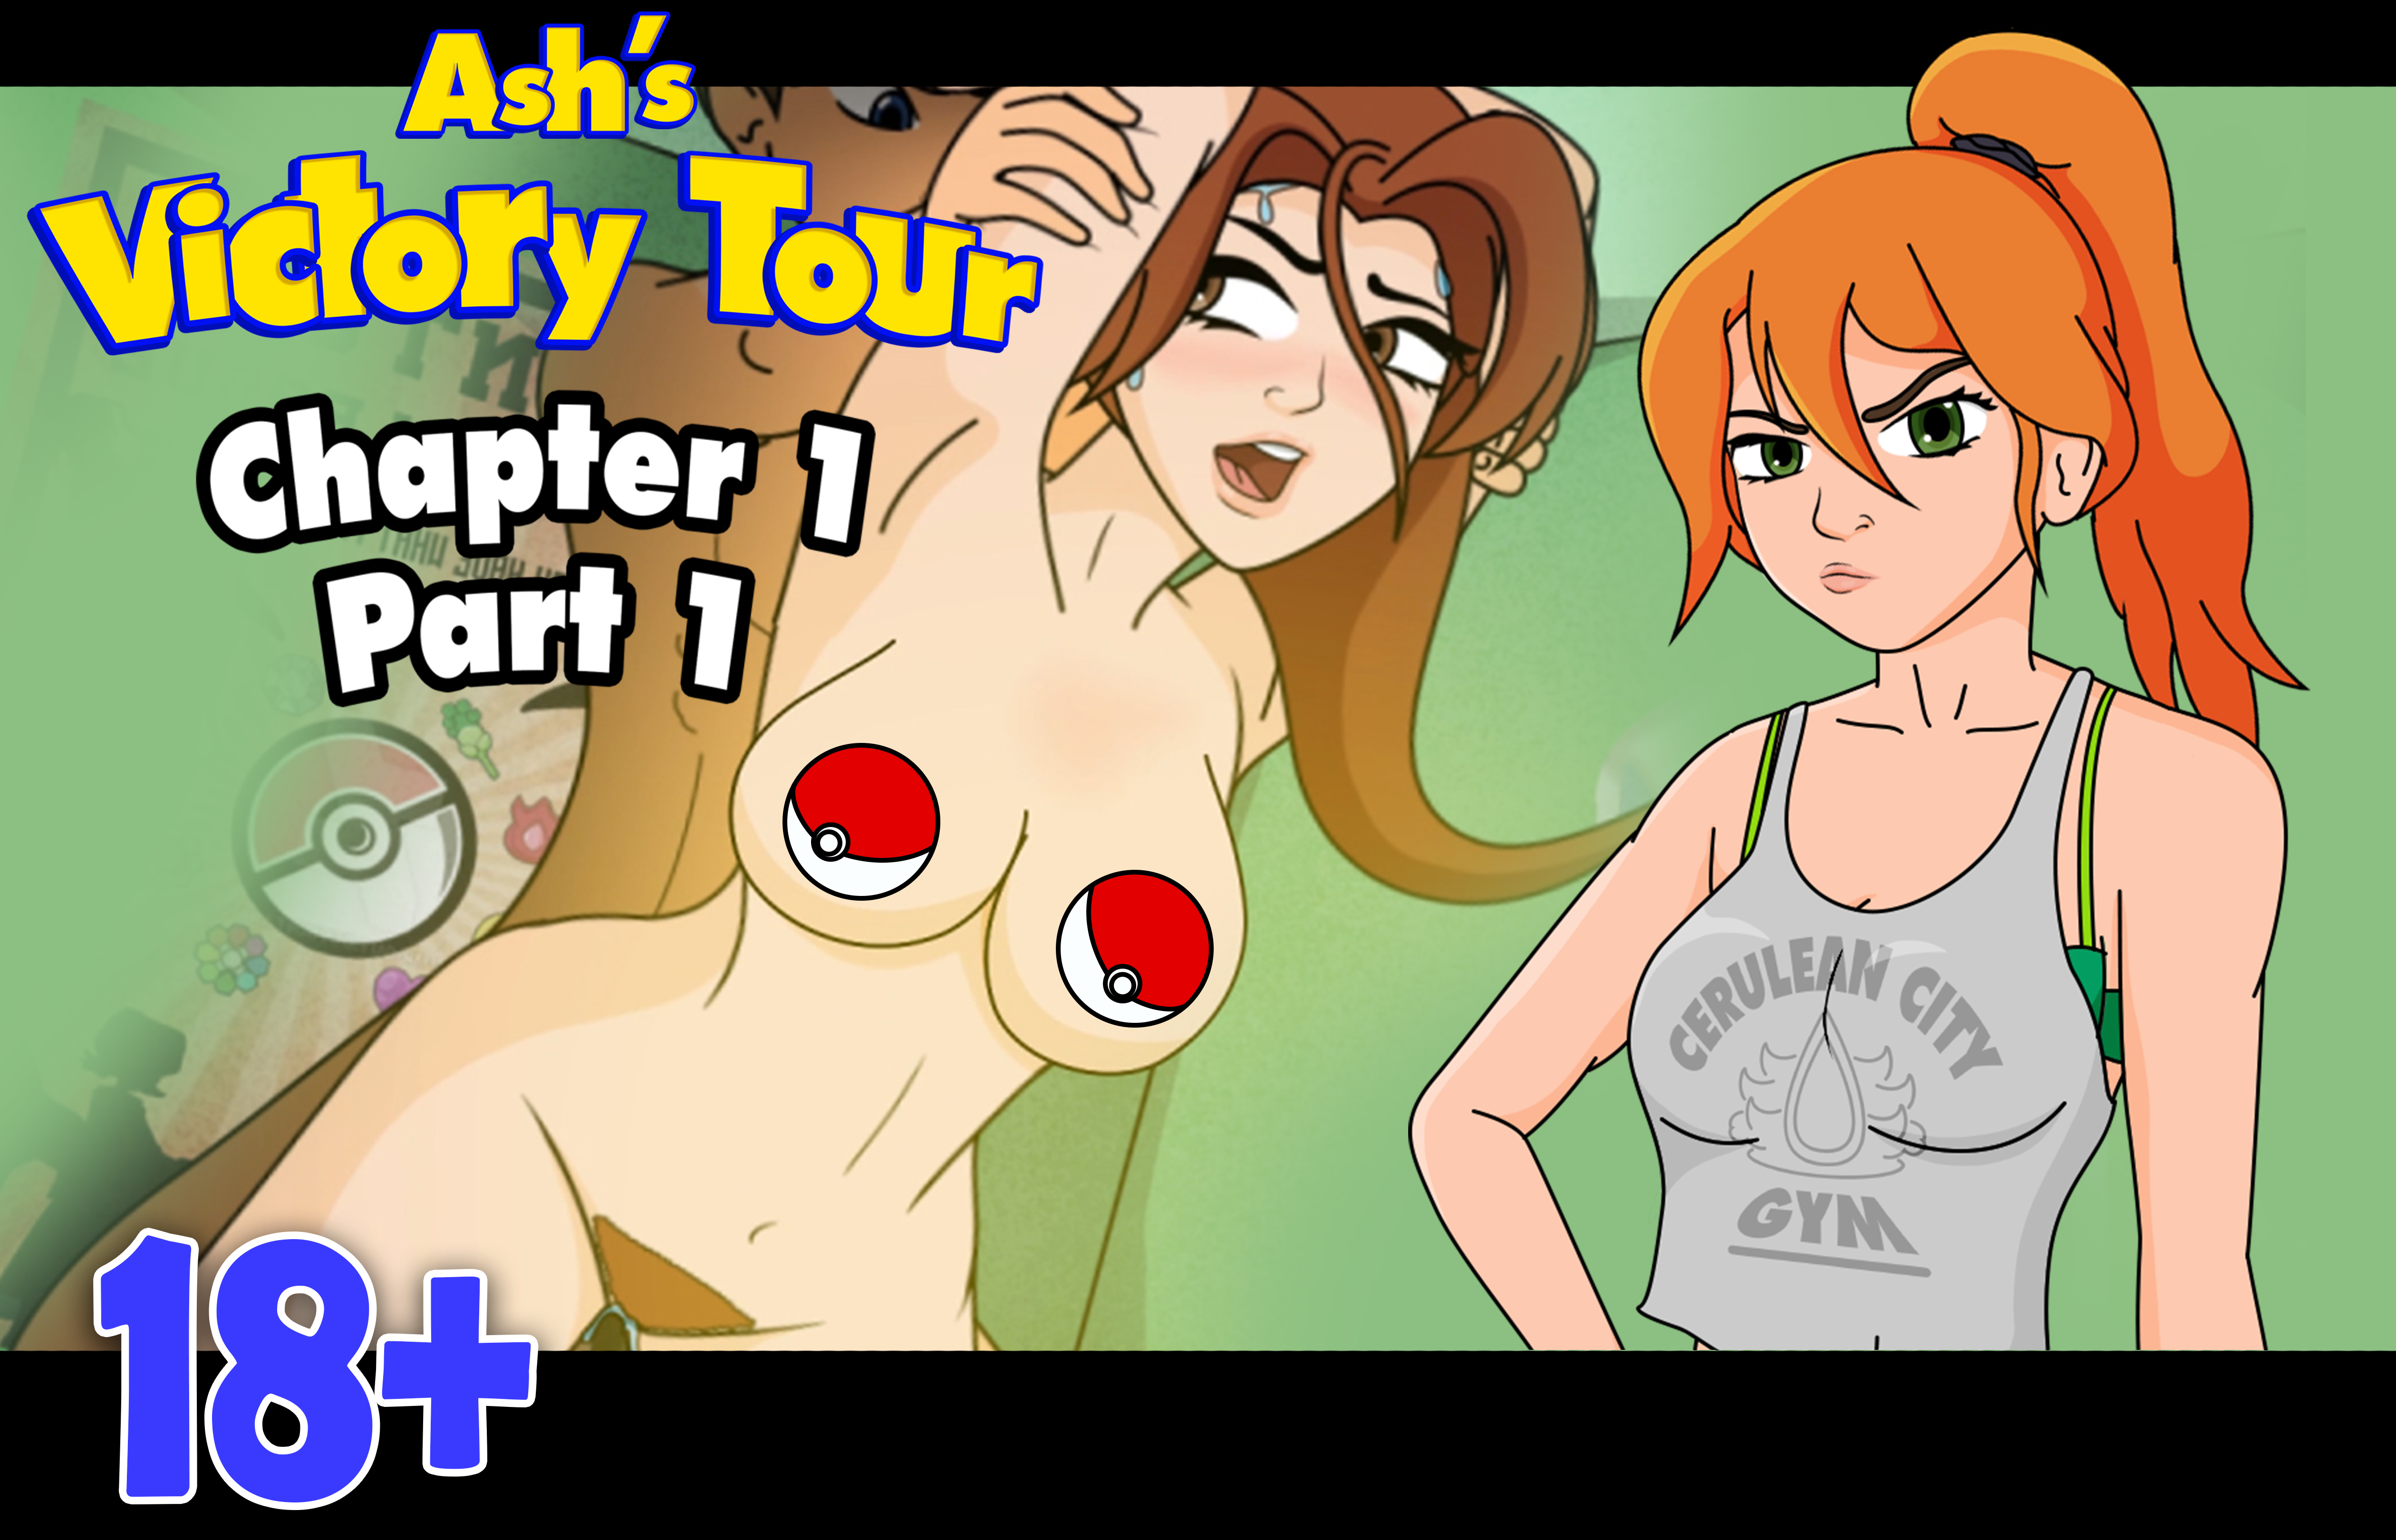 Red Hair Hentai Porn Game - Ash's Victory Tour - Chapter 1.1